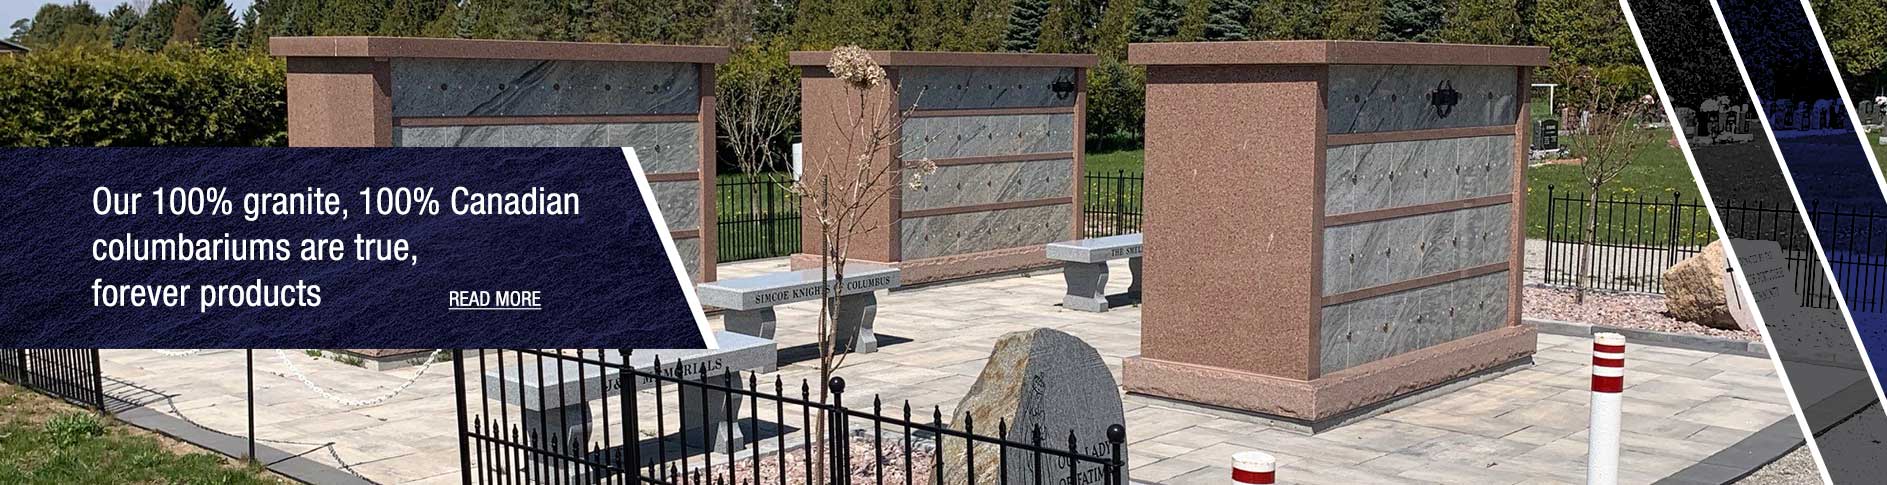 Strongest columbariums on the market